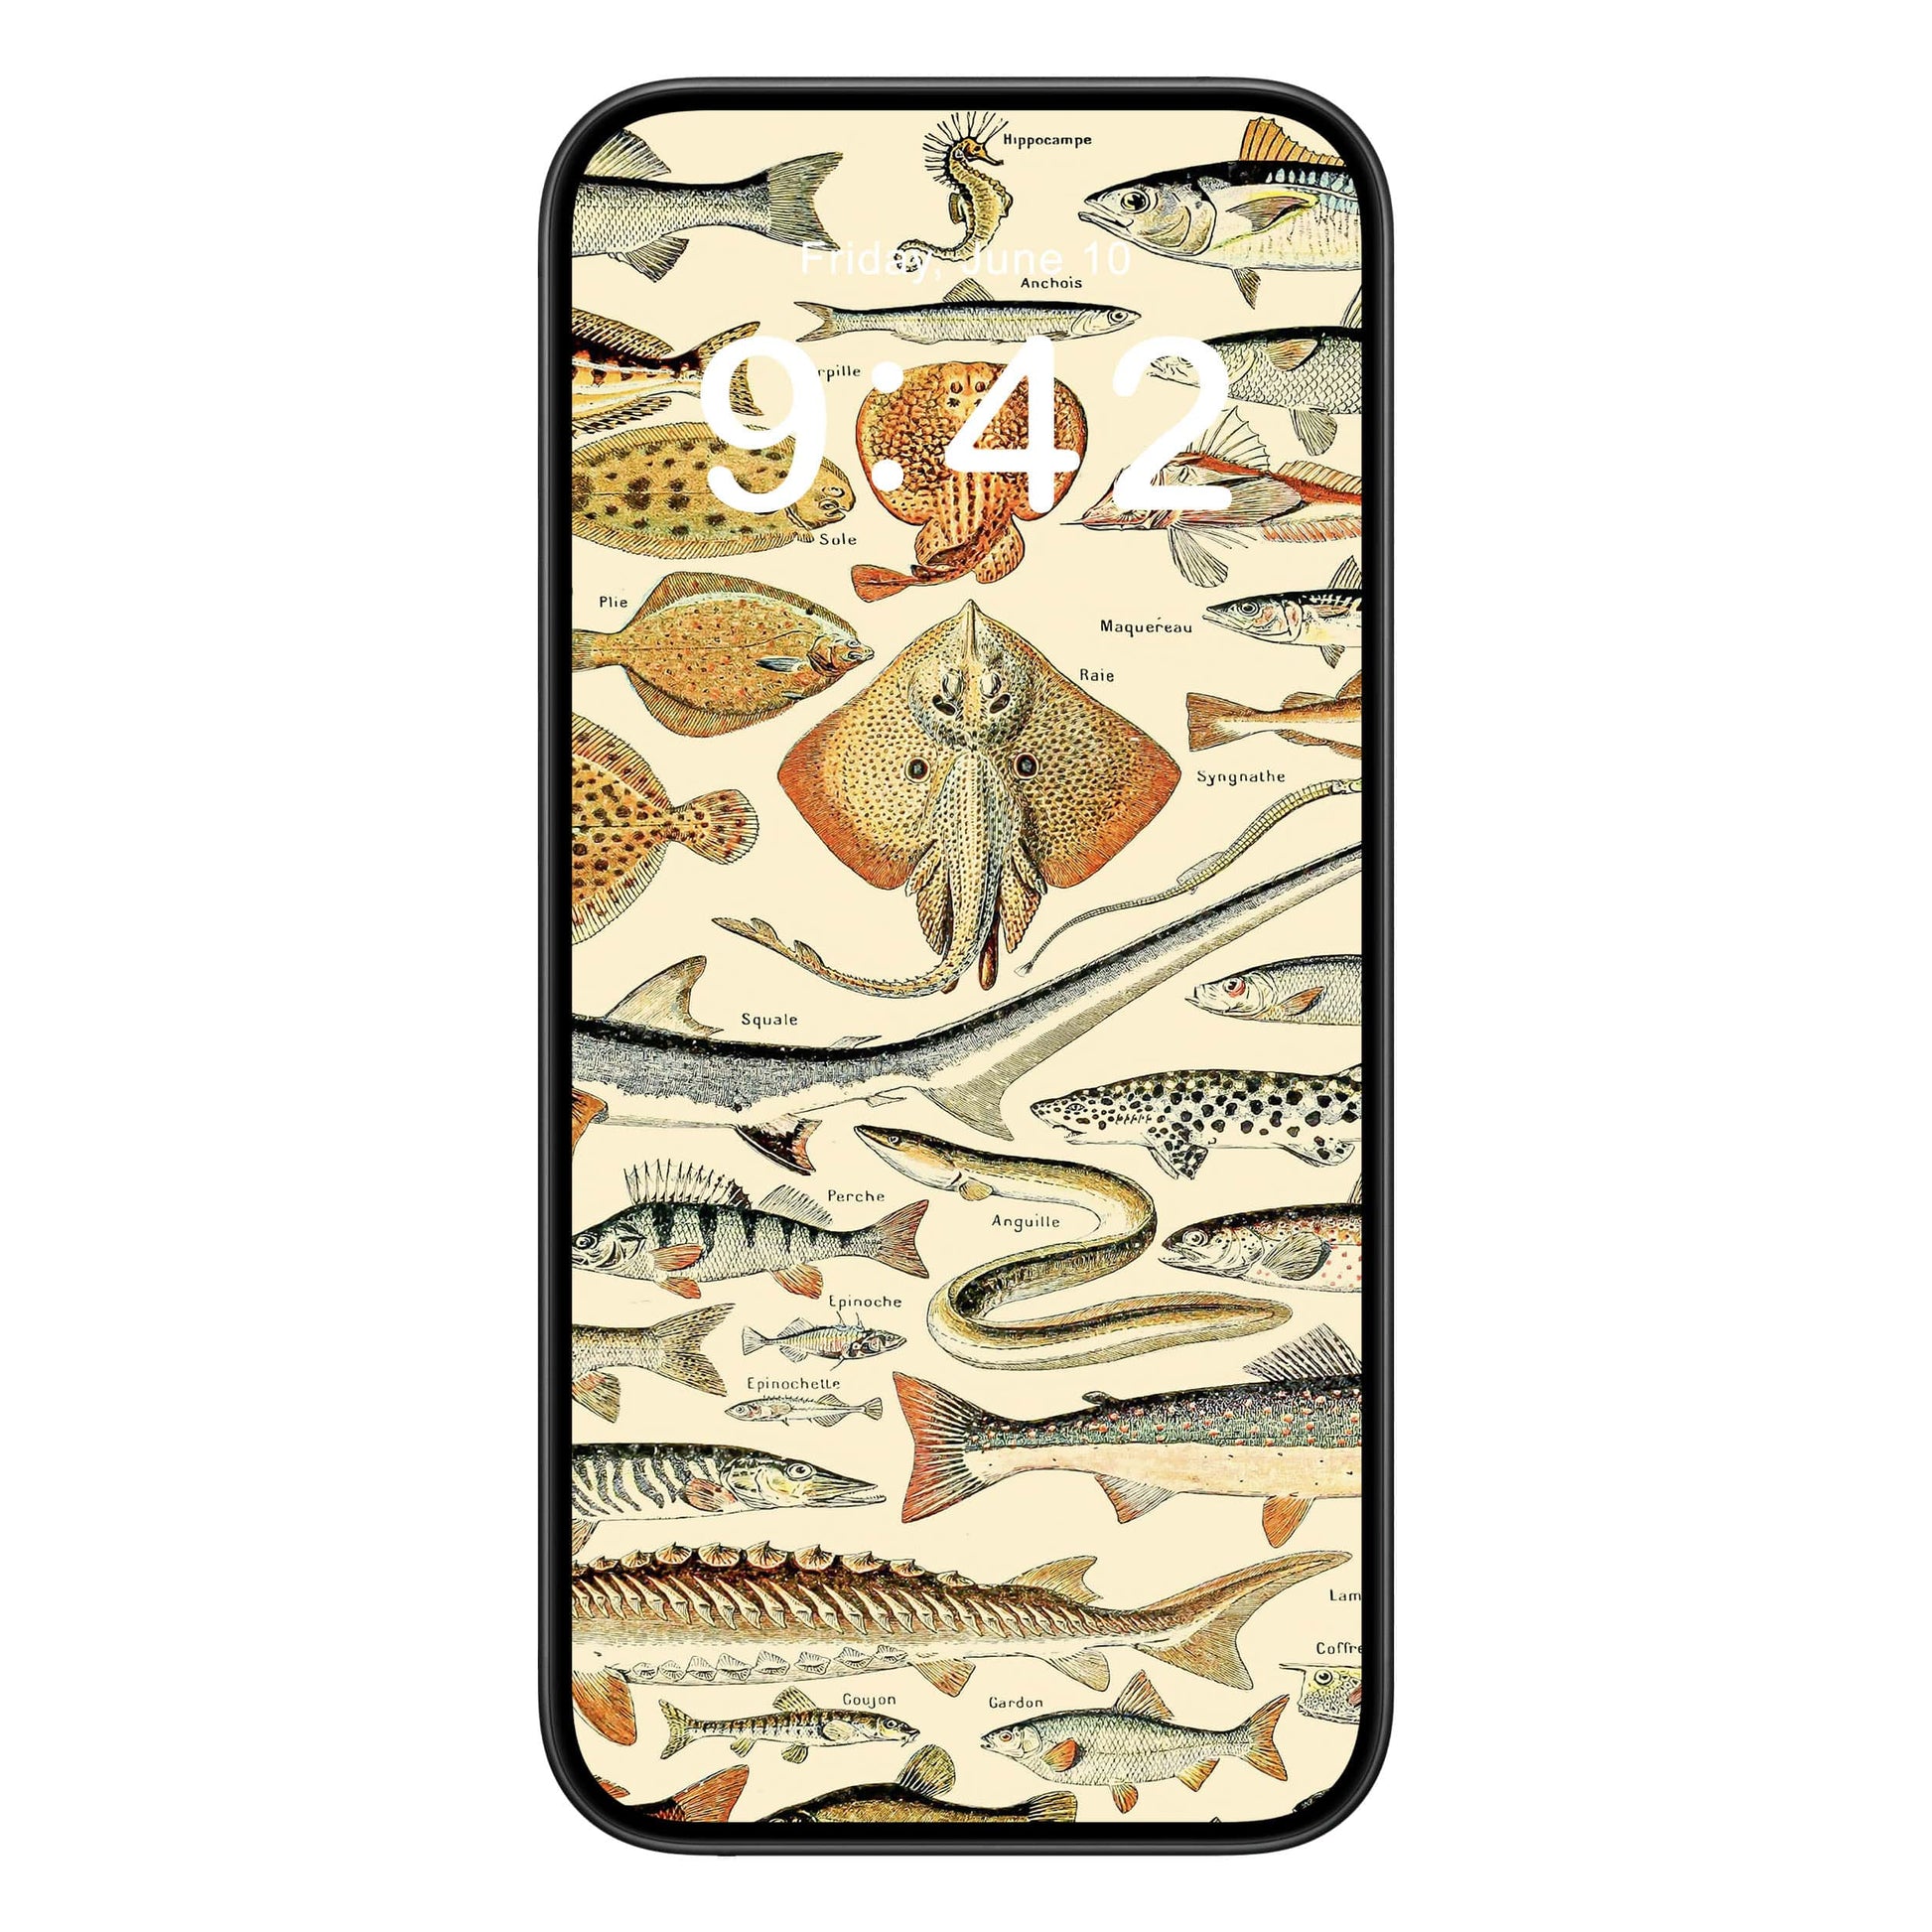 Fishing phone wallpaper background with types of fish chart design shown on a phone lock screen, instant download available.